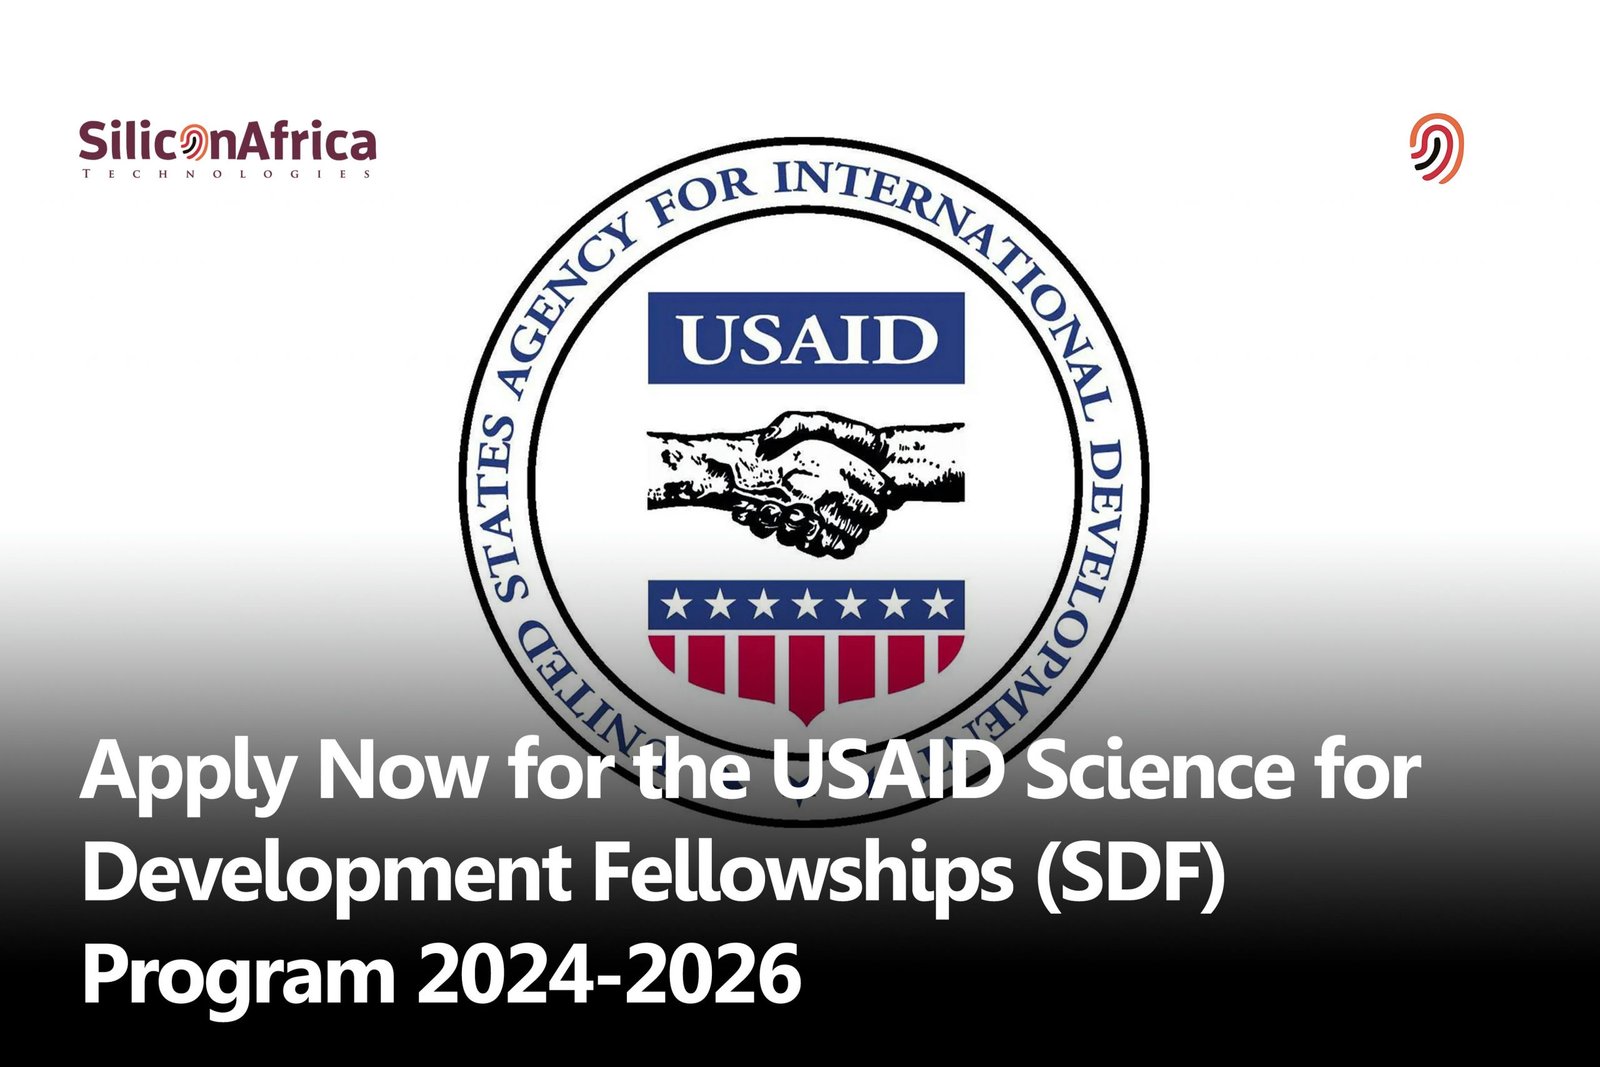 Apply Now for the USAID Science for Development Fellowships (SDF) Program 2024-2026